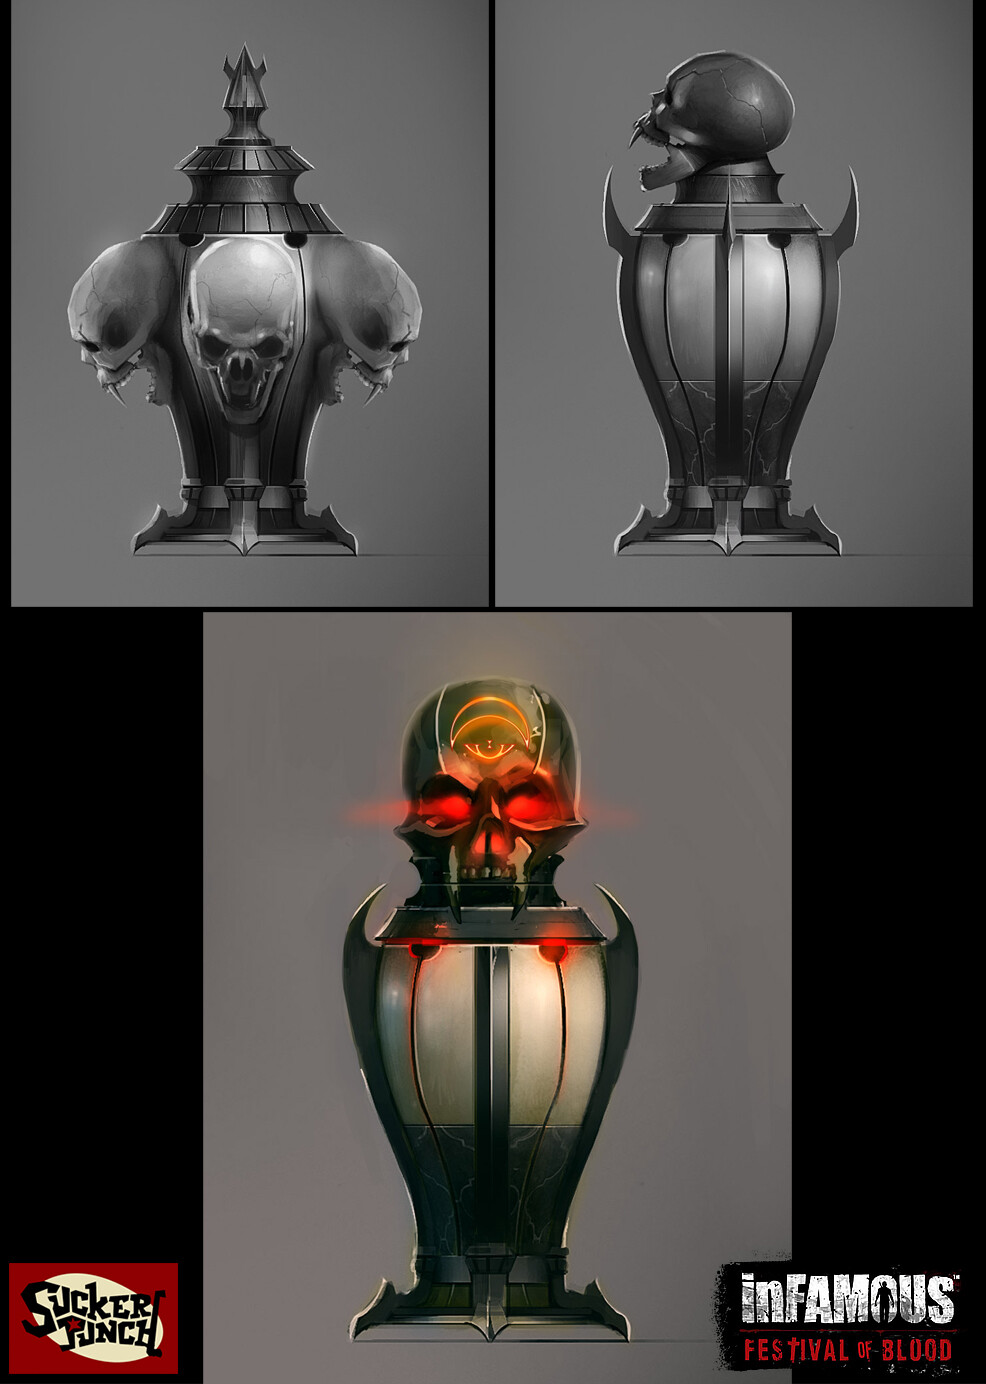 Concept for collectible urns found around the city